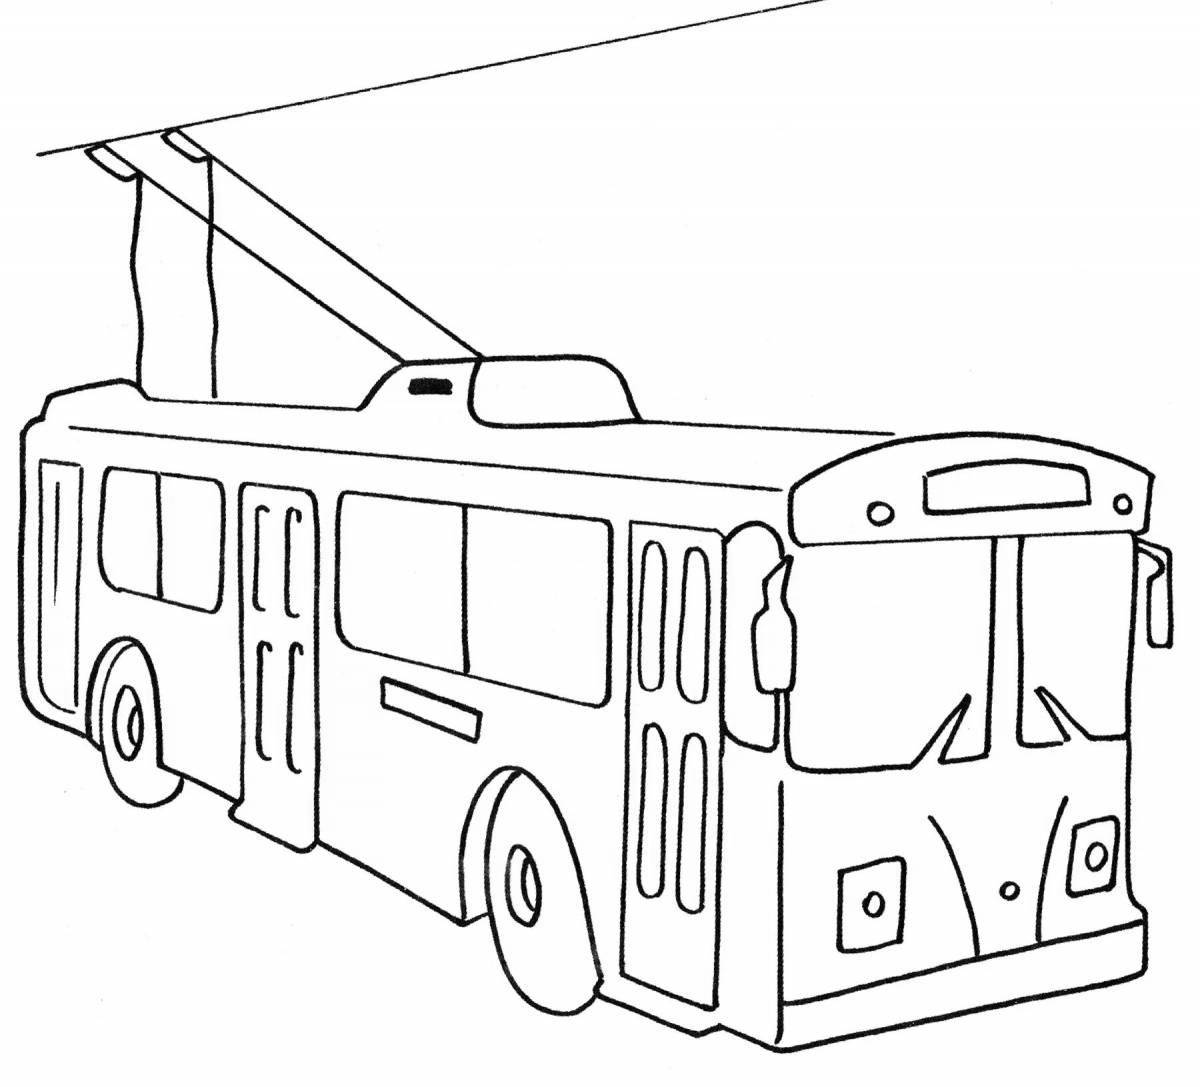 A playful tram coloring book for 4-5 year olds